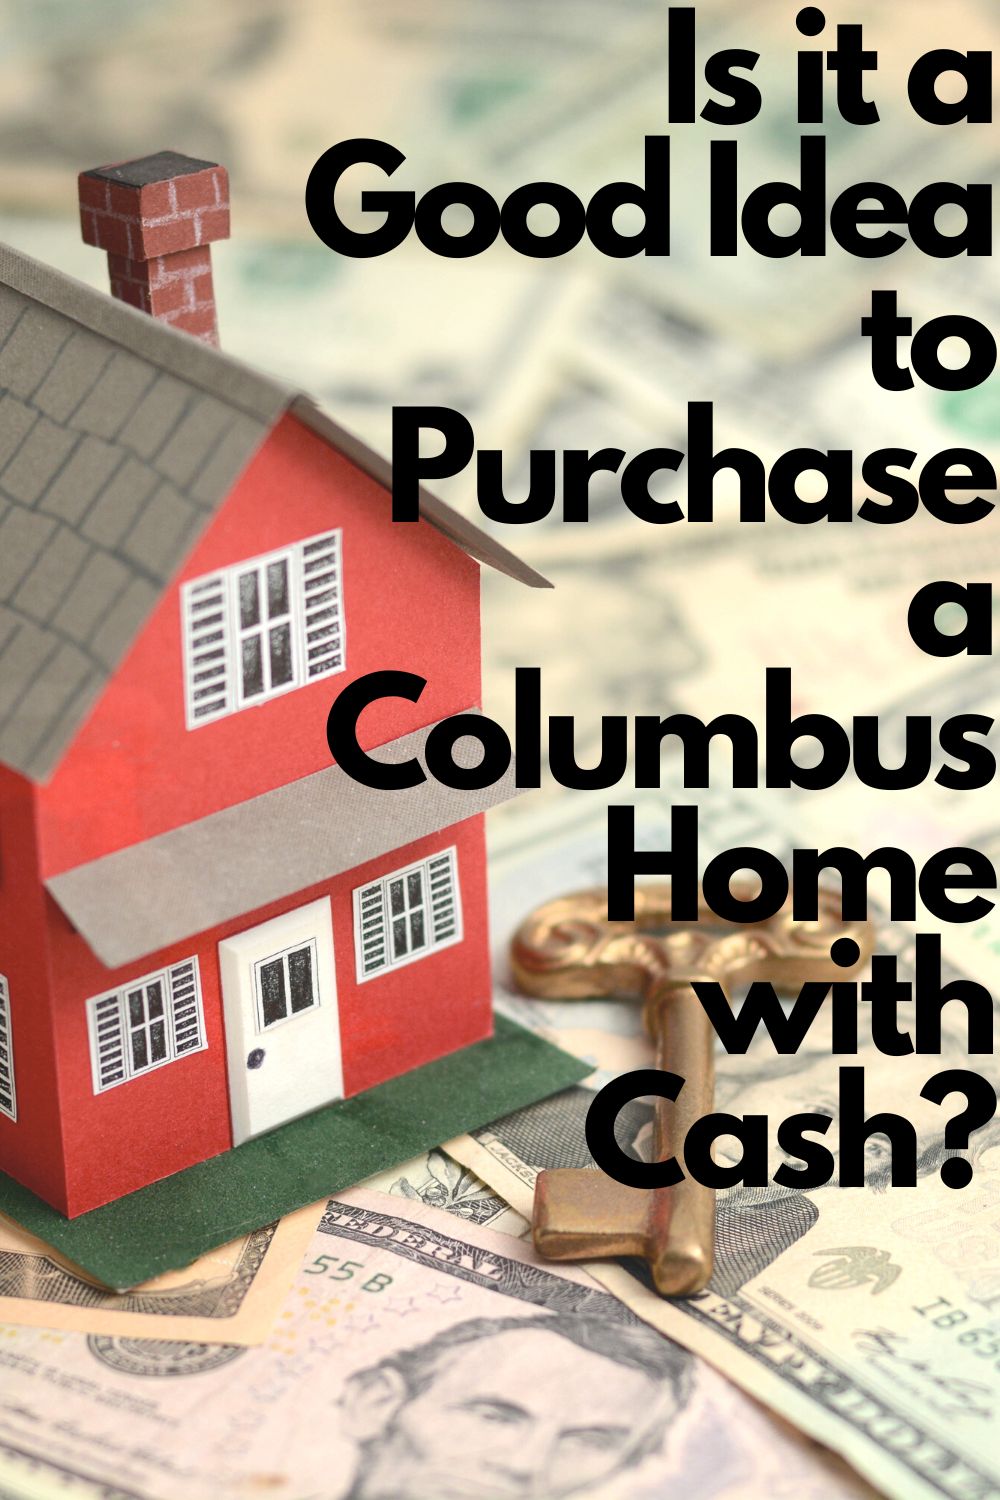 Is it a Good Idea to Purchase a Columbus Home with Cash?